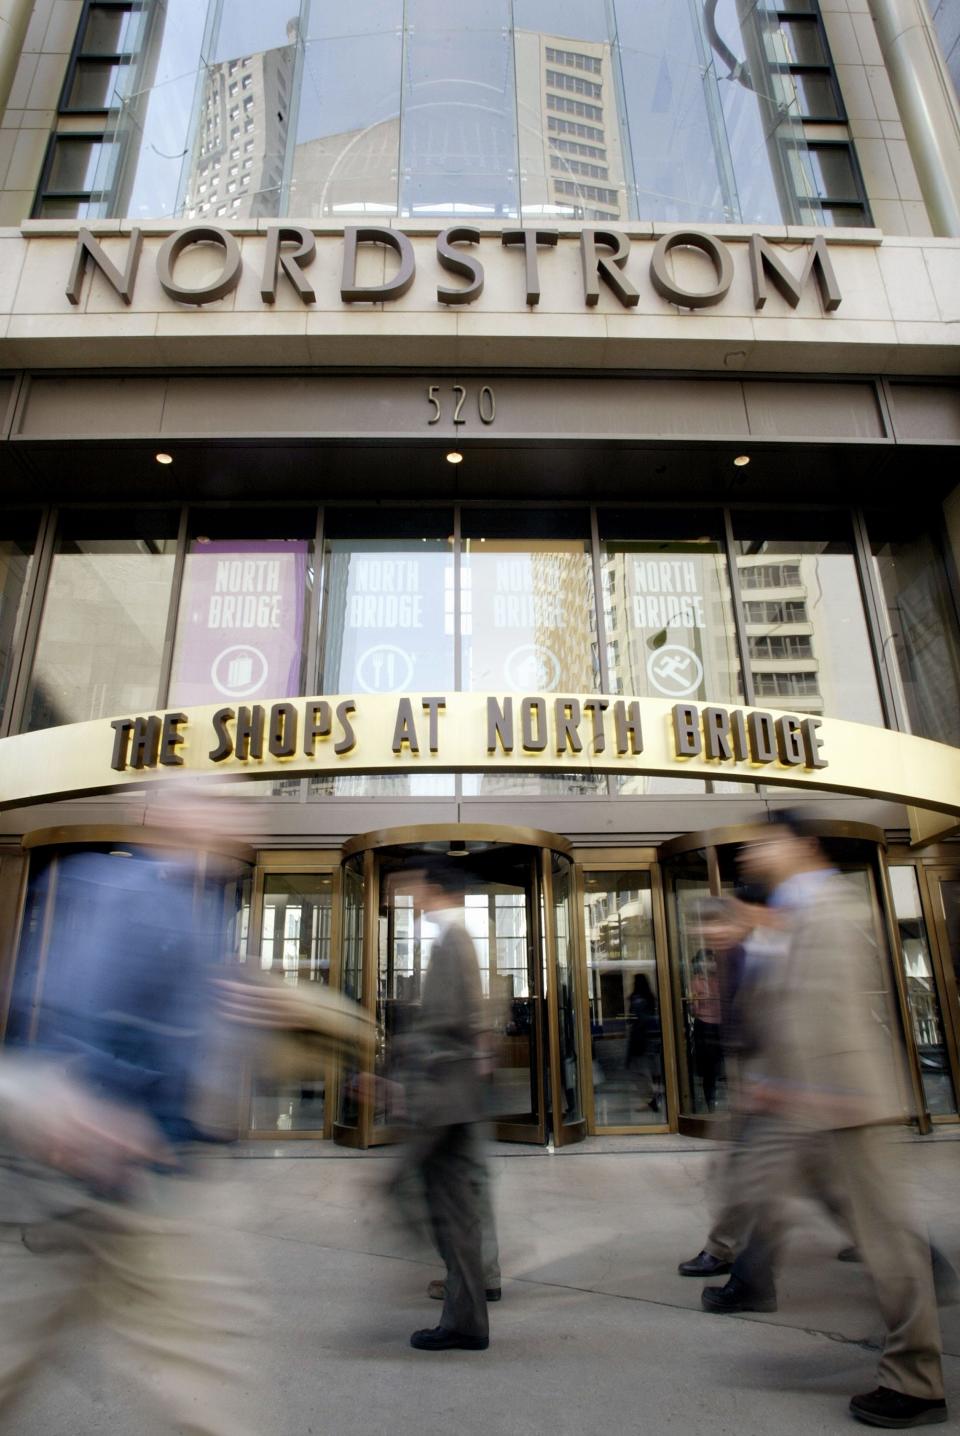 A Nordstrom store in Chicago in 2003.